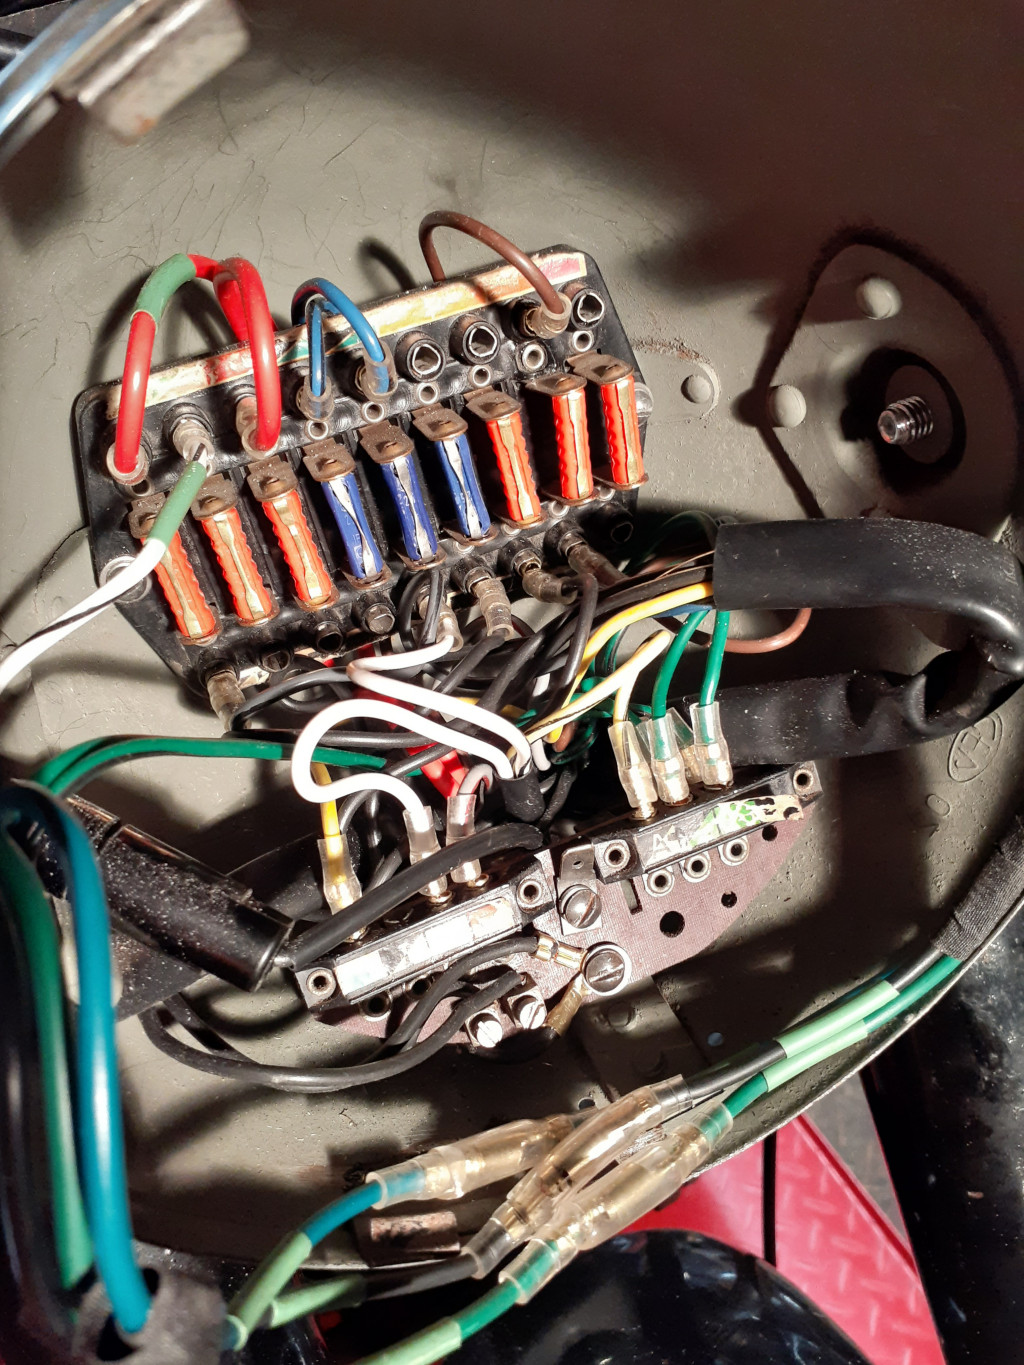 Another good view of the connections inside a standard police headlight bucket.